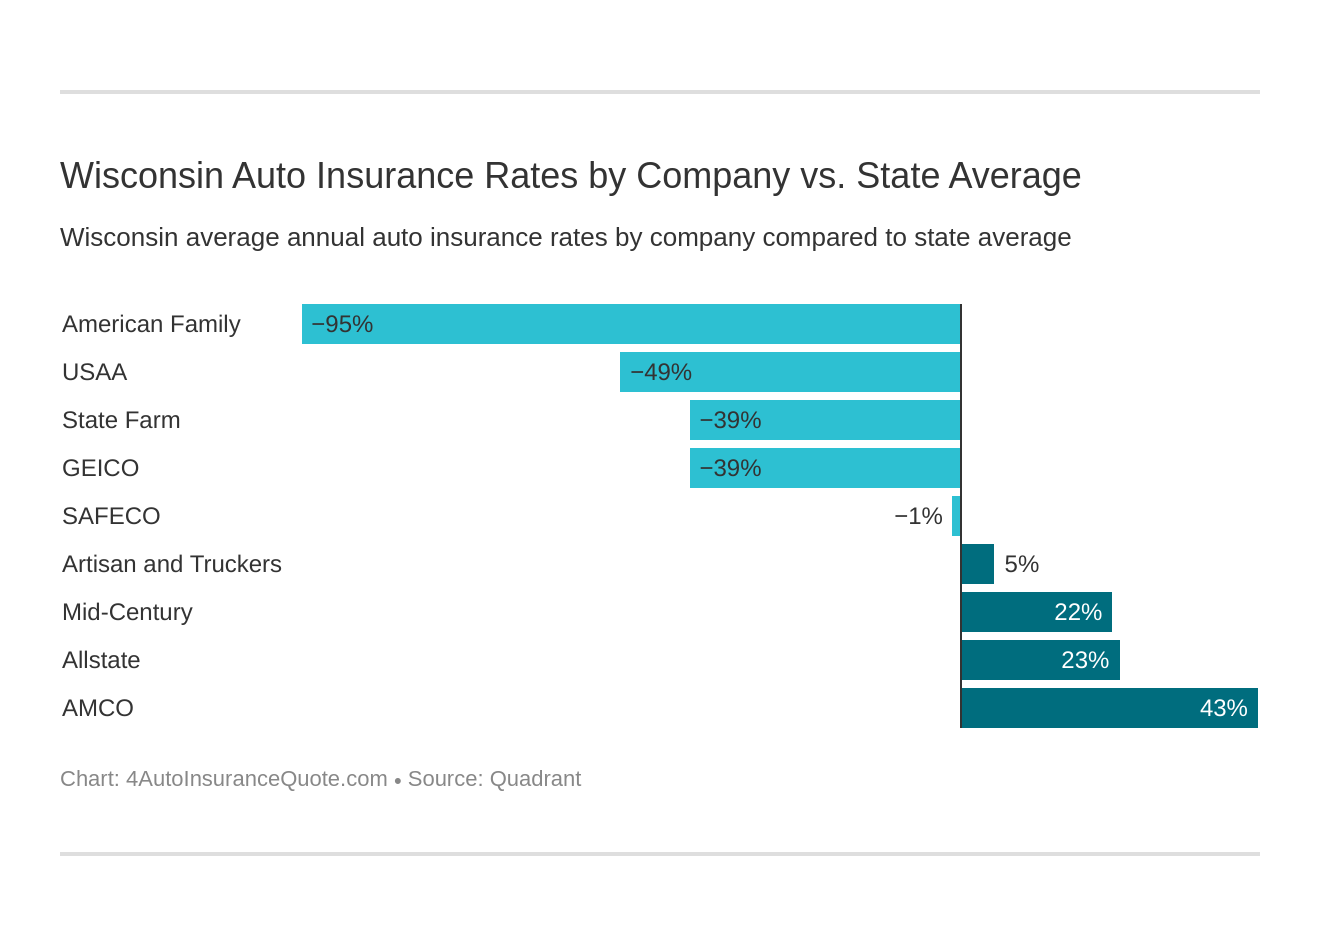 Wisconsin Auto Insurance Rates by Company vs. State Average